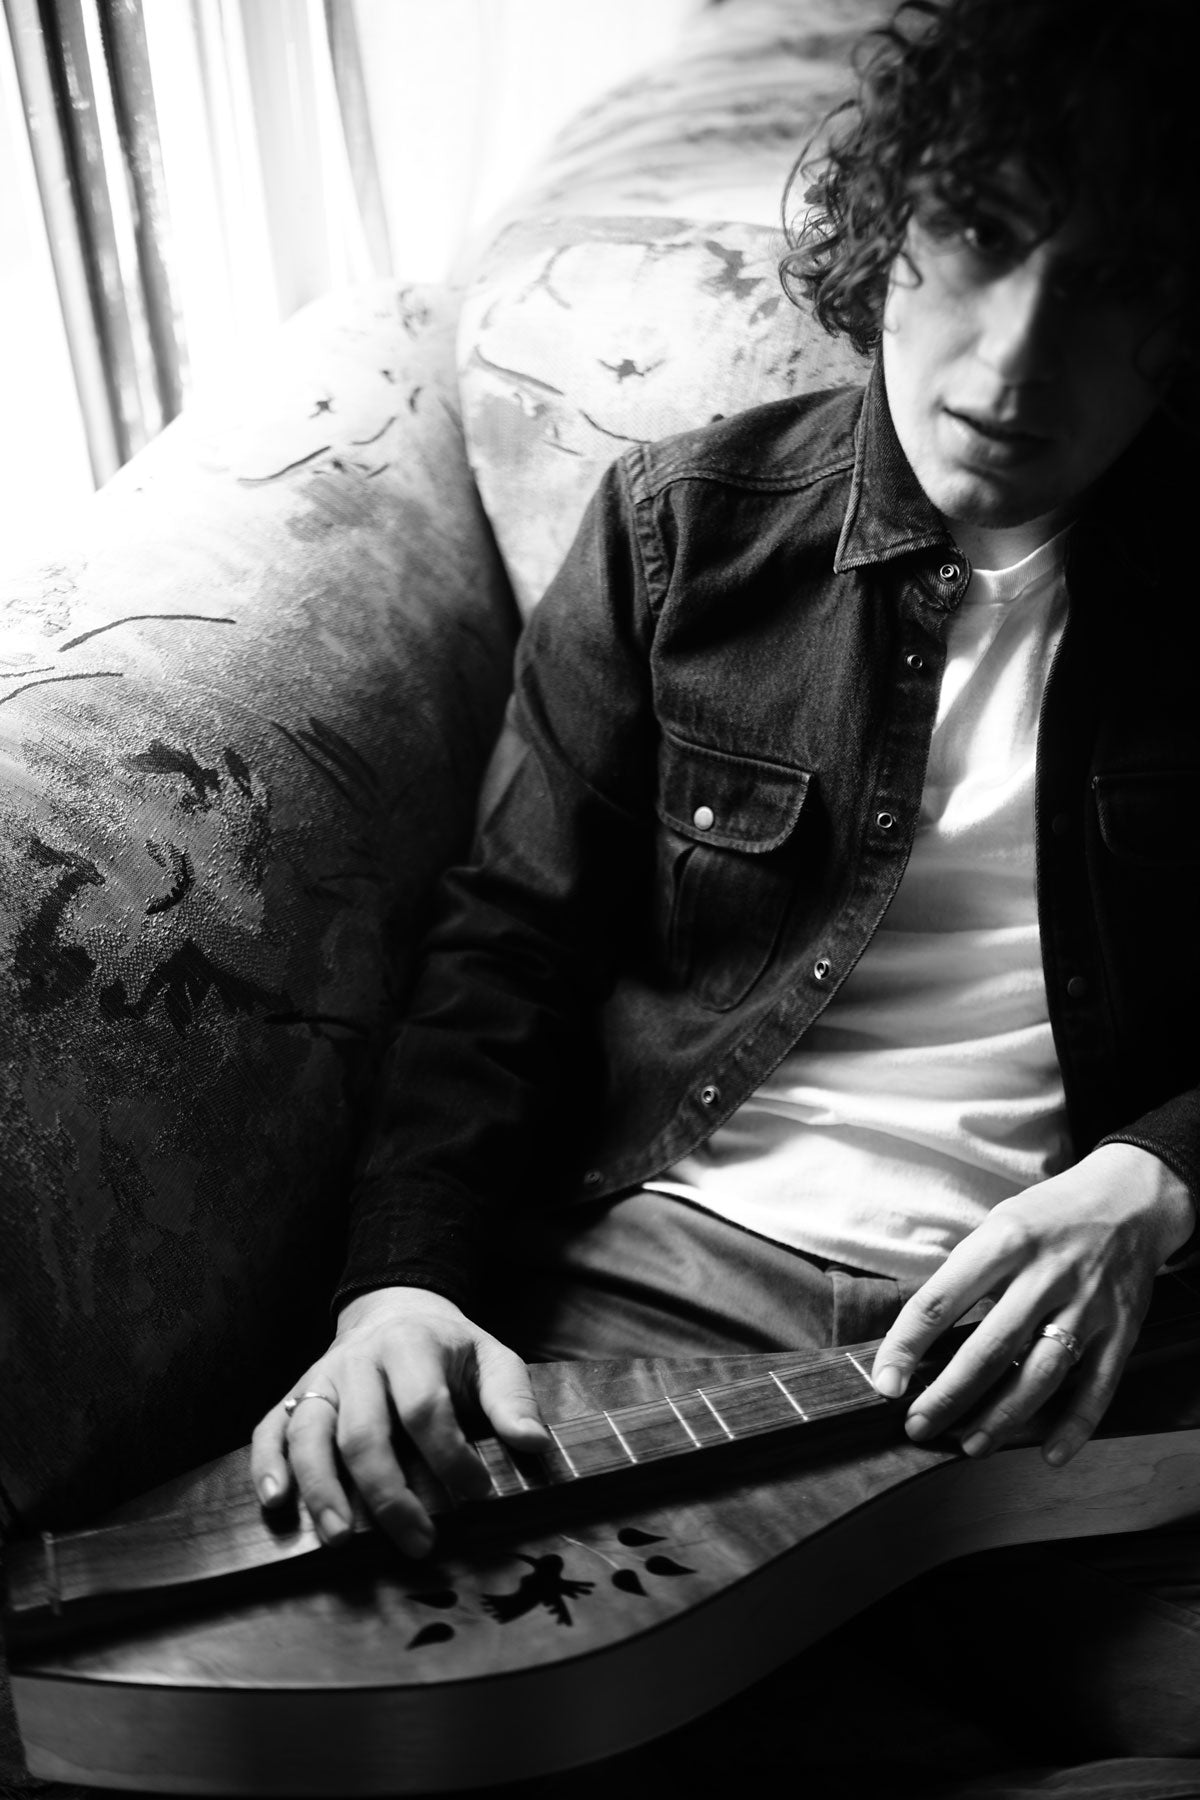 Model sits in deep armchair wearing chinos, white t-shirt, and denim overshirt. Photo is black and white.